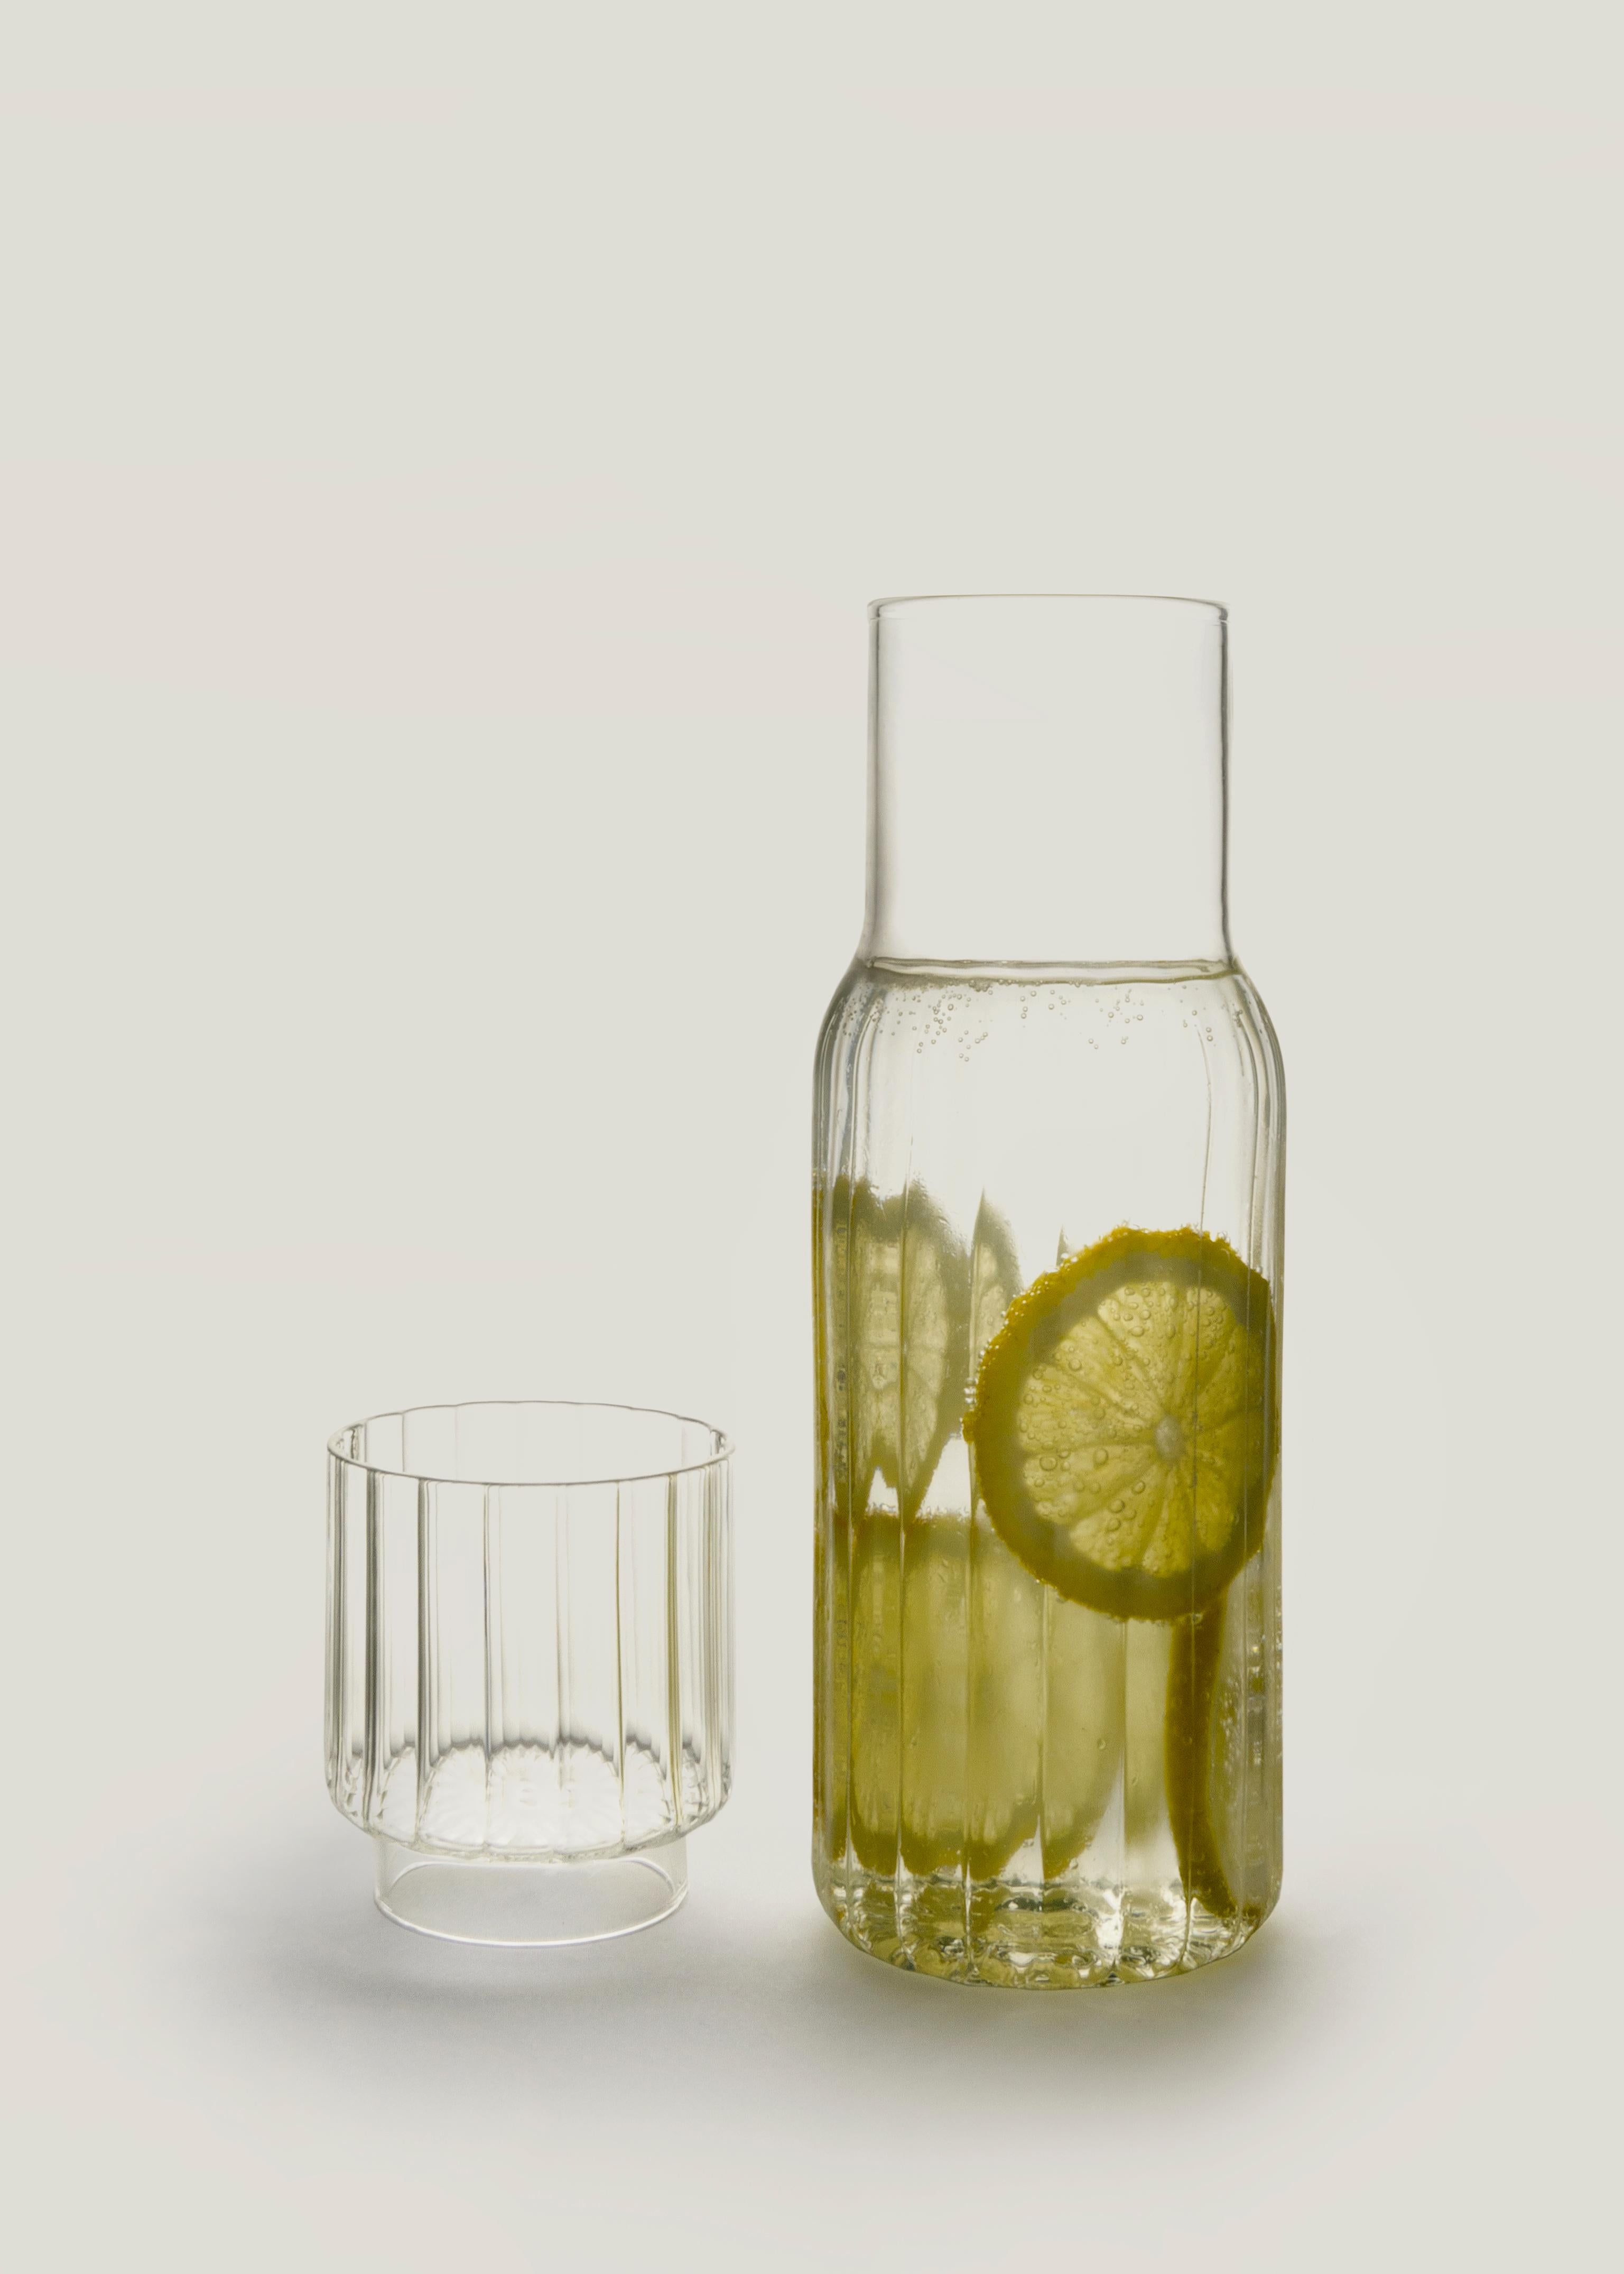 Hand-Crafted Contemporary Pillar Carafe Glass Set by Agustina Bottoni — Handmade in Italy For Sale